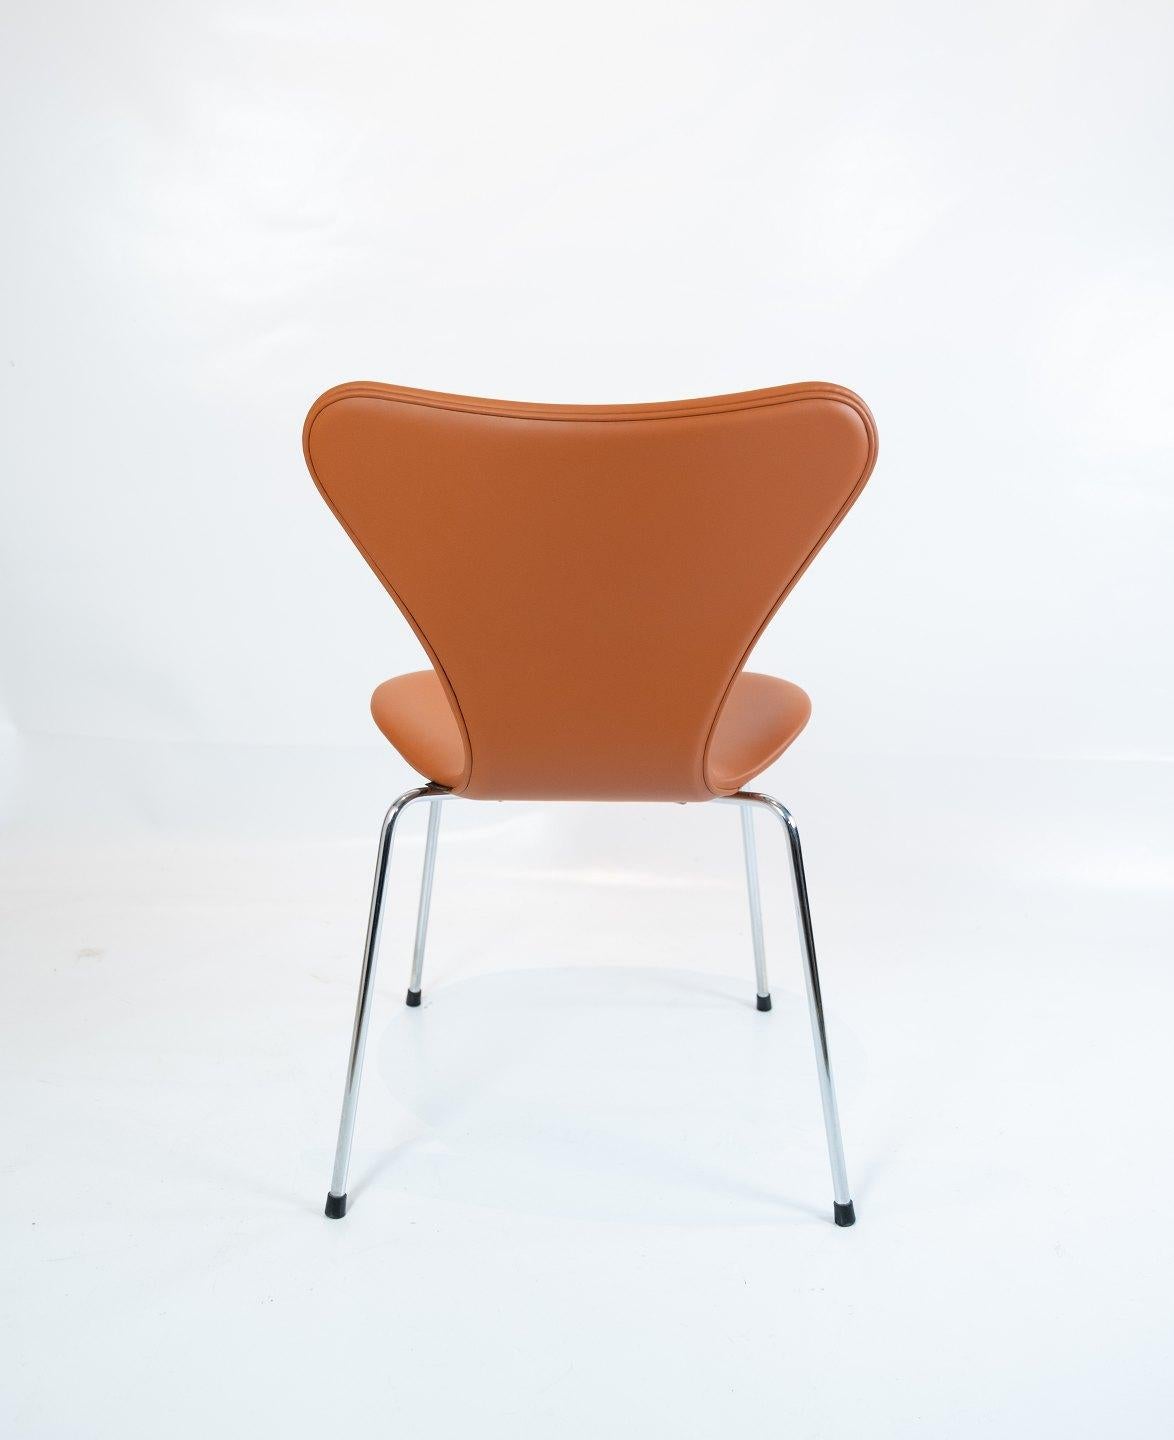 Mid-20th Century Set of 6 Seven Chairs, Model 3107, Designed by Arne Jacobsen